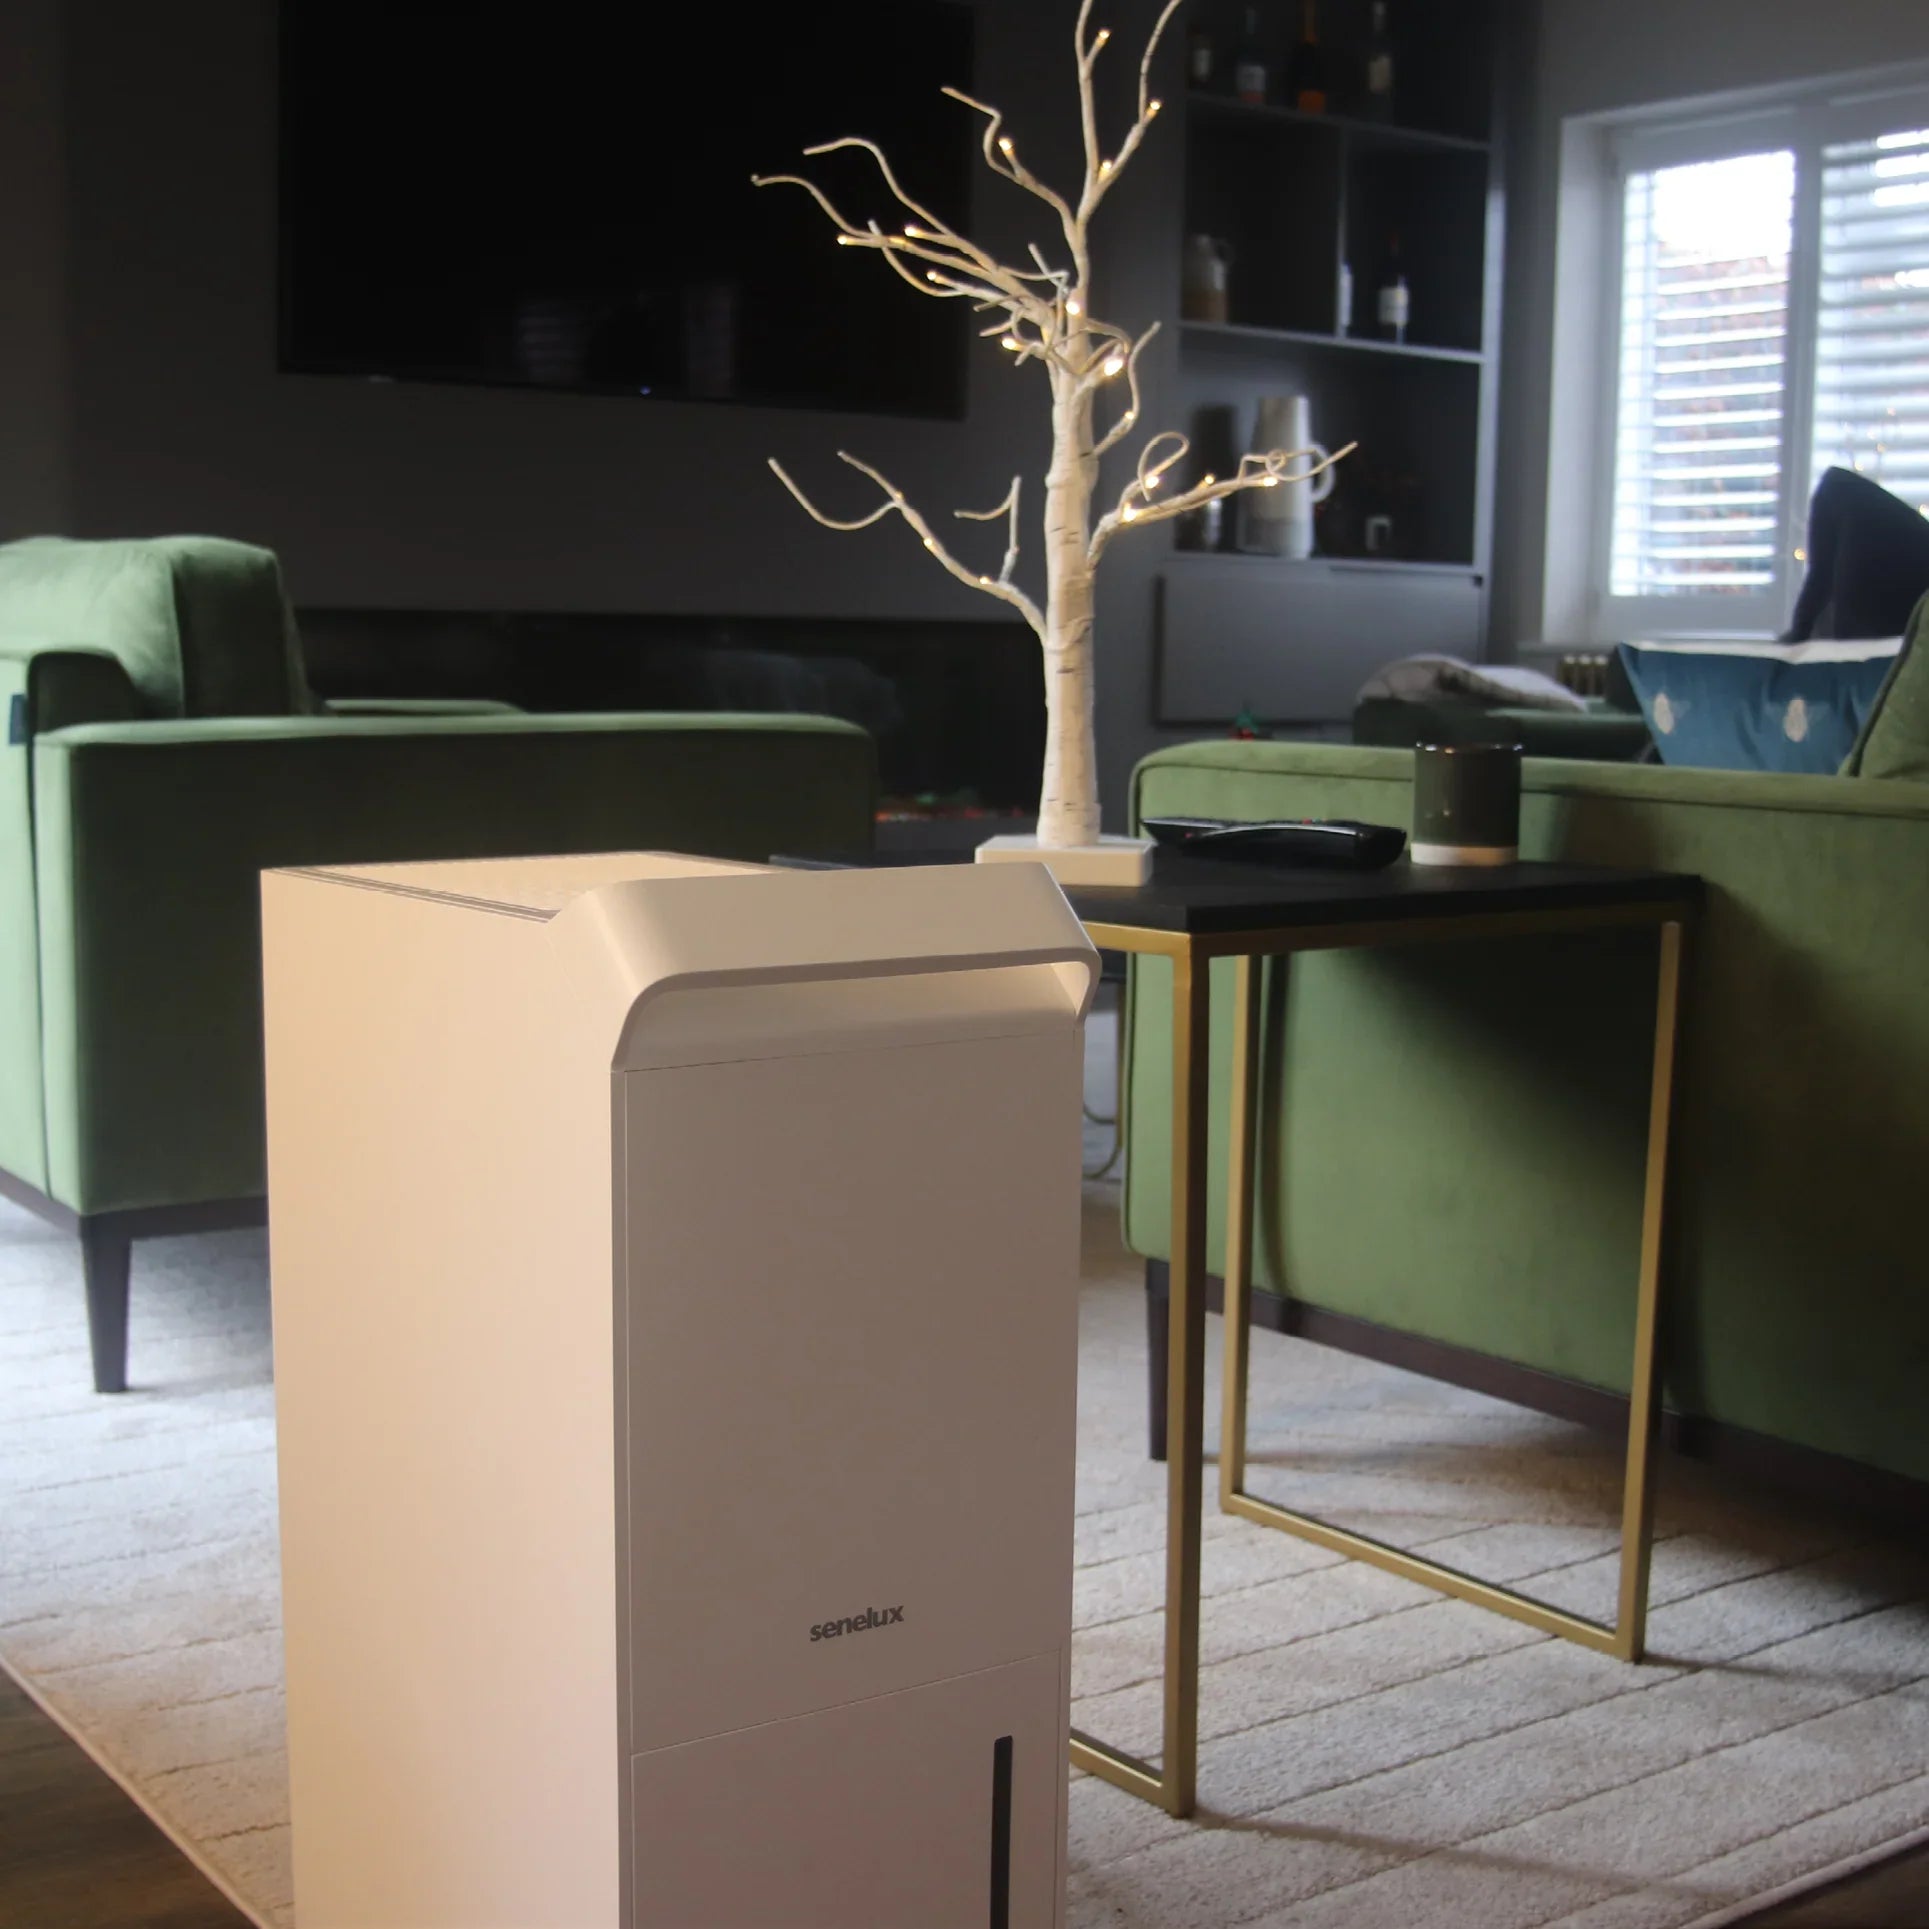 A photo of the Senelux 25l/day dehumidifier standing in a room with a green sofa behind it and a stylish Christmas tree on a table to the side 